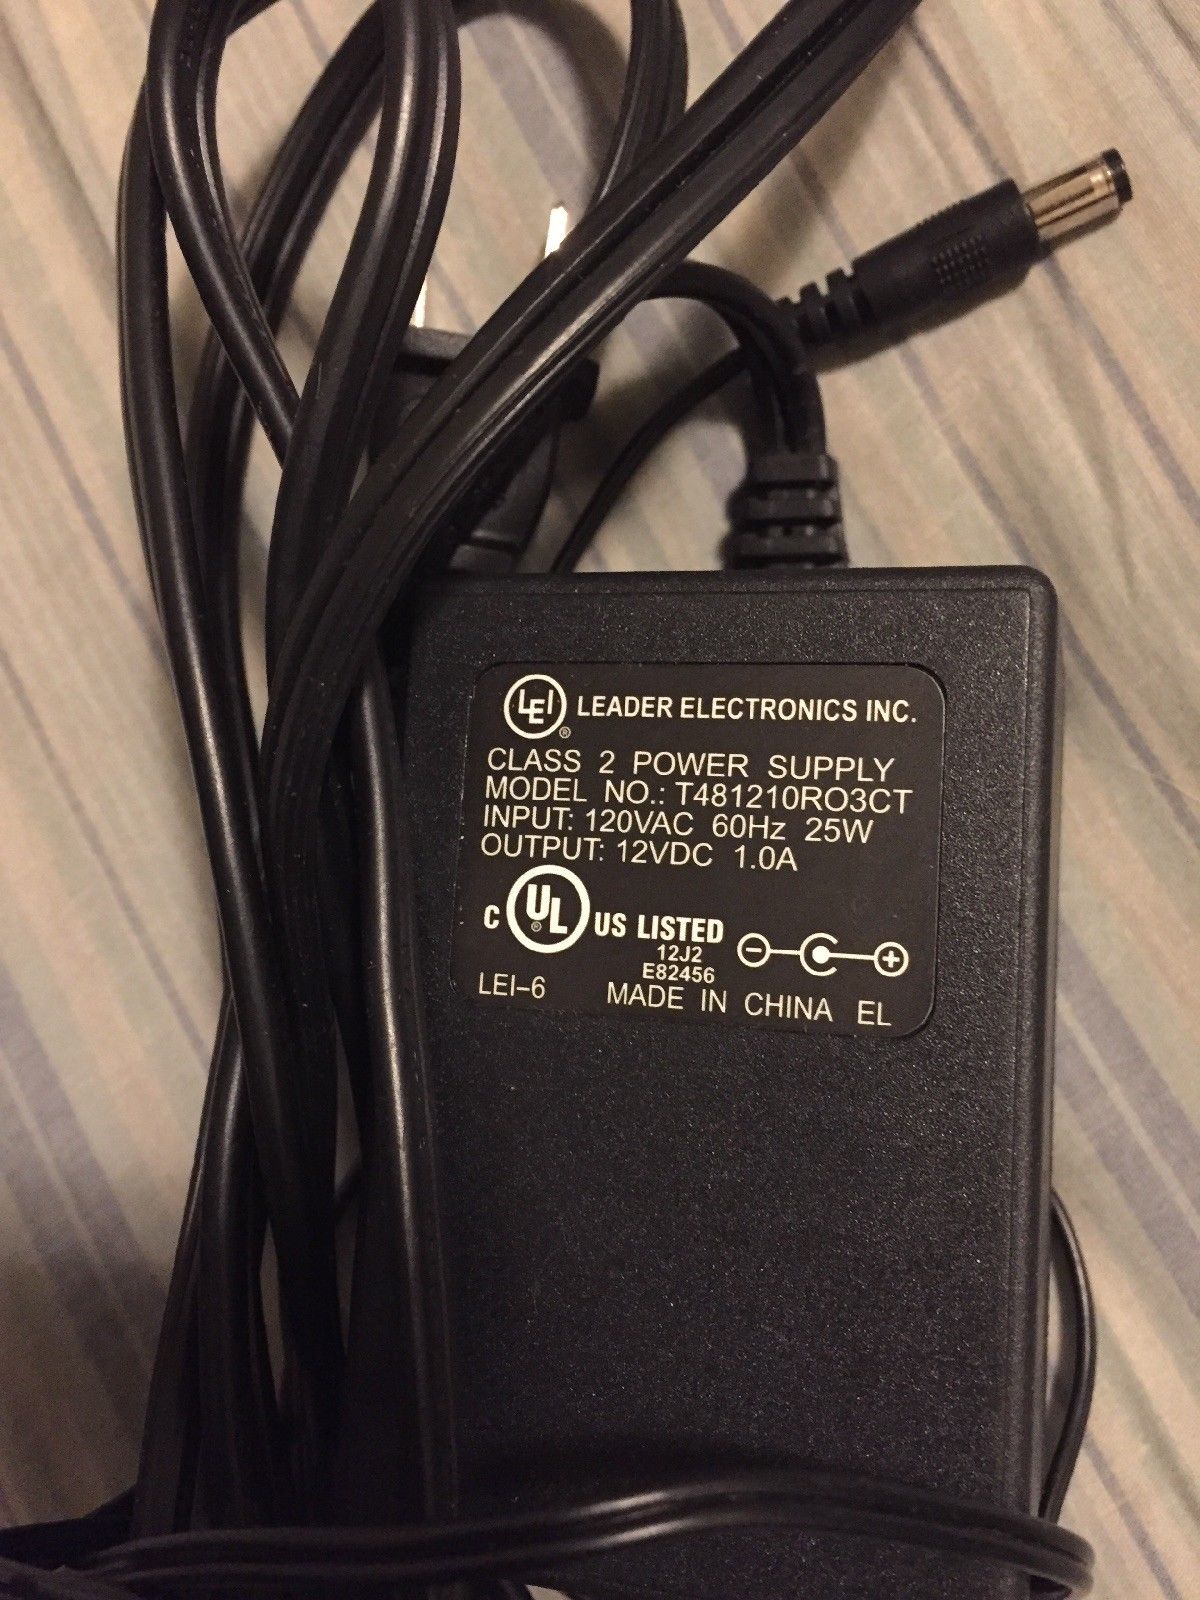 *Brand NEW* Misc 12vdc 1.0a ac adapter Power Adapter Cord LEI T481210RO3CT - Click Image to Close